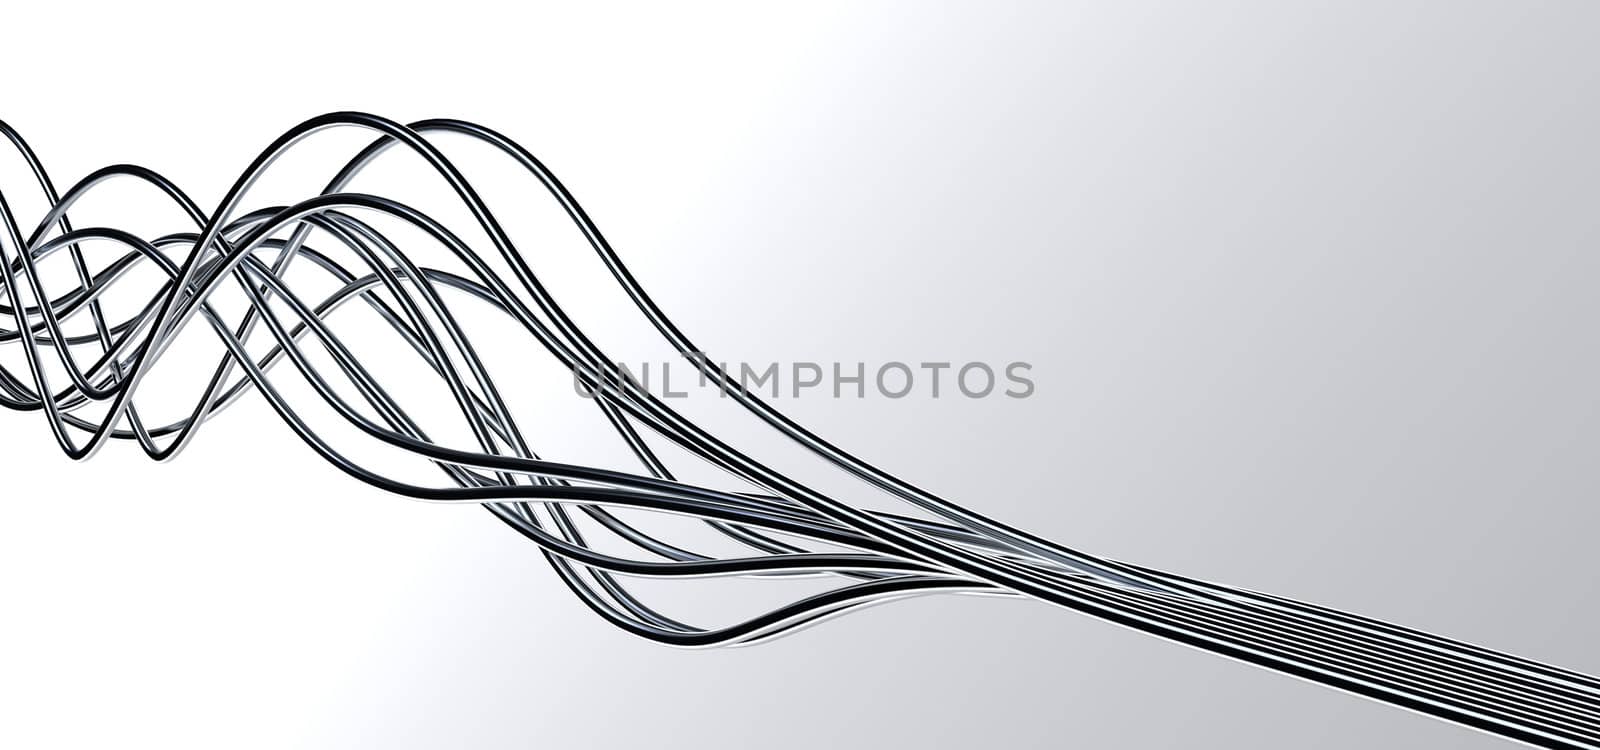 bright metallic fibre-optical cables on a white background